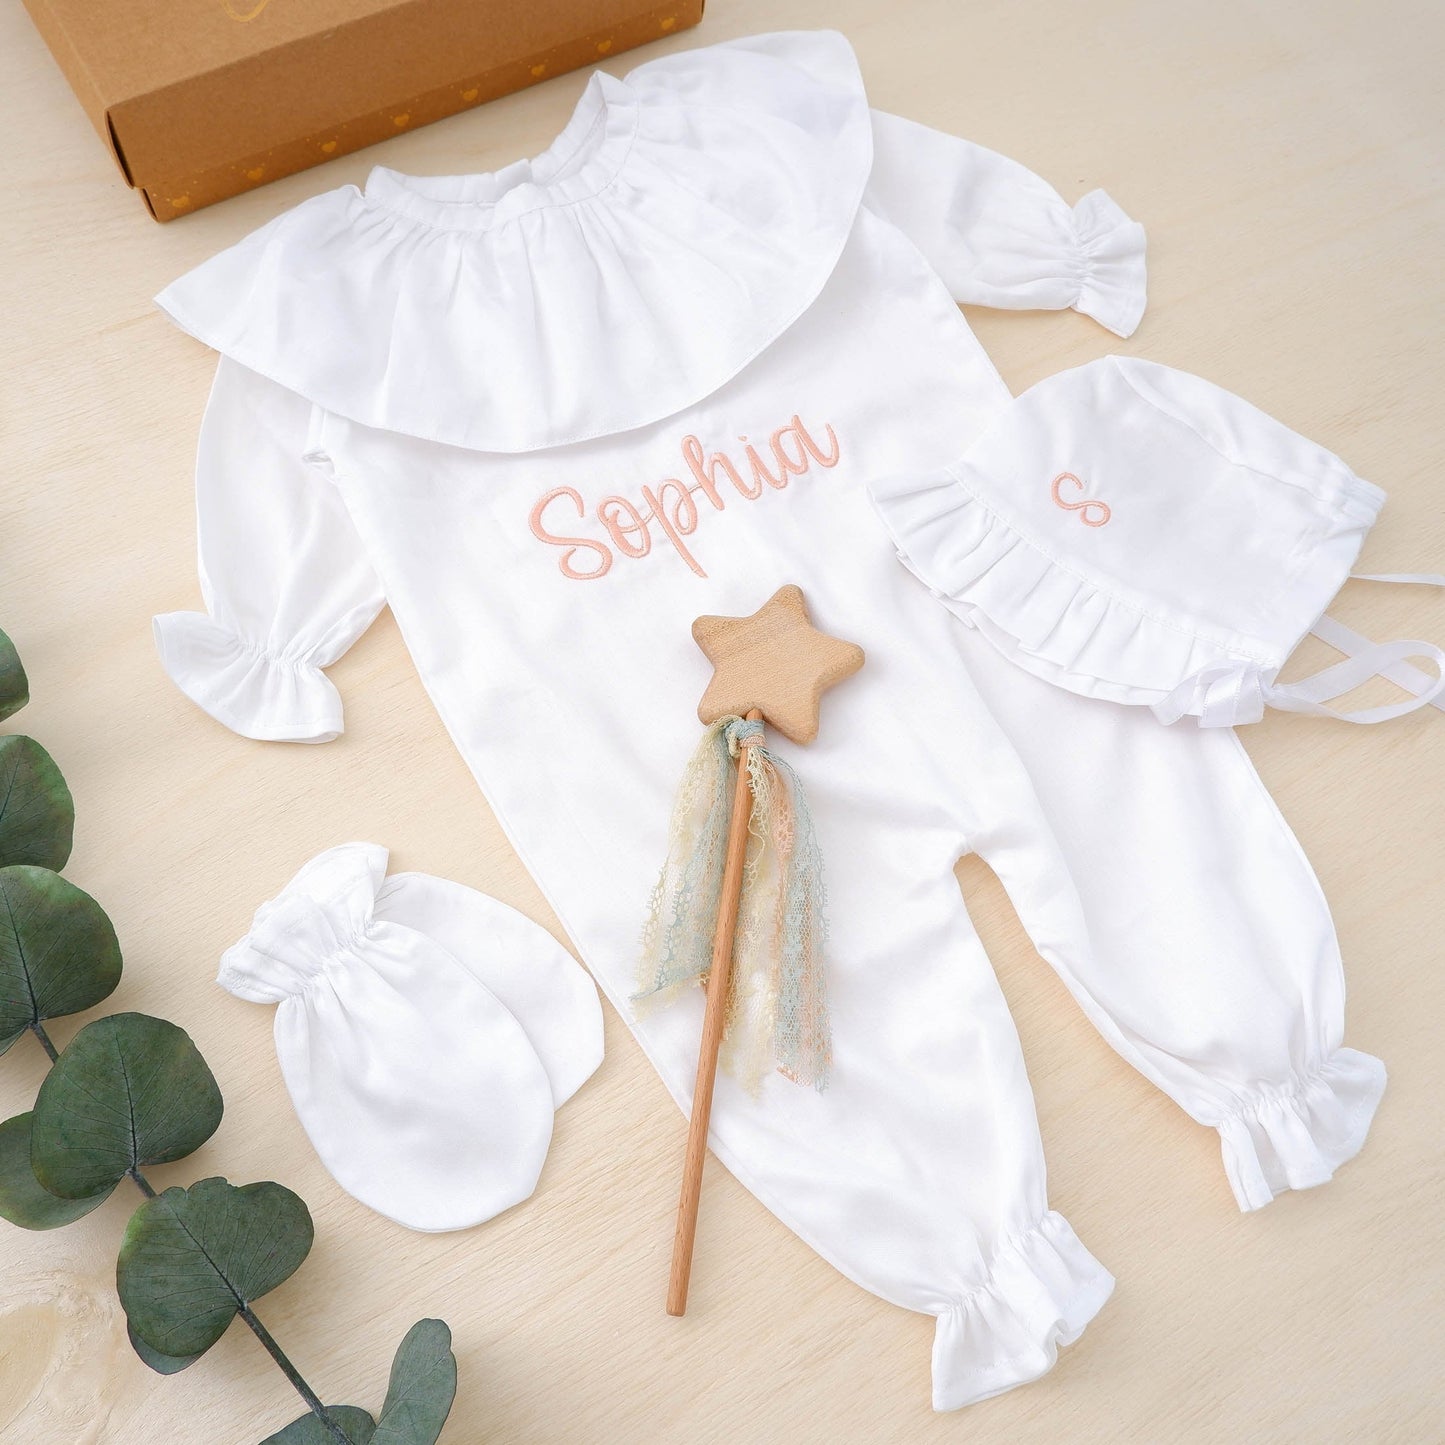 Personalized coming home outfit,Baby girl coming home outfit,Personalized gift for newborn,Customized baby girl hospital outfit